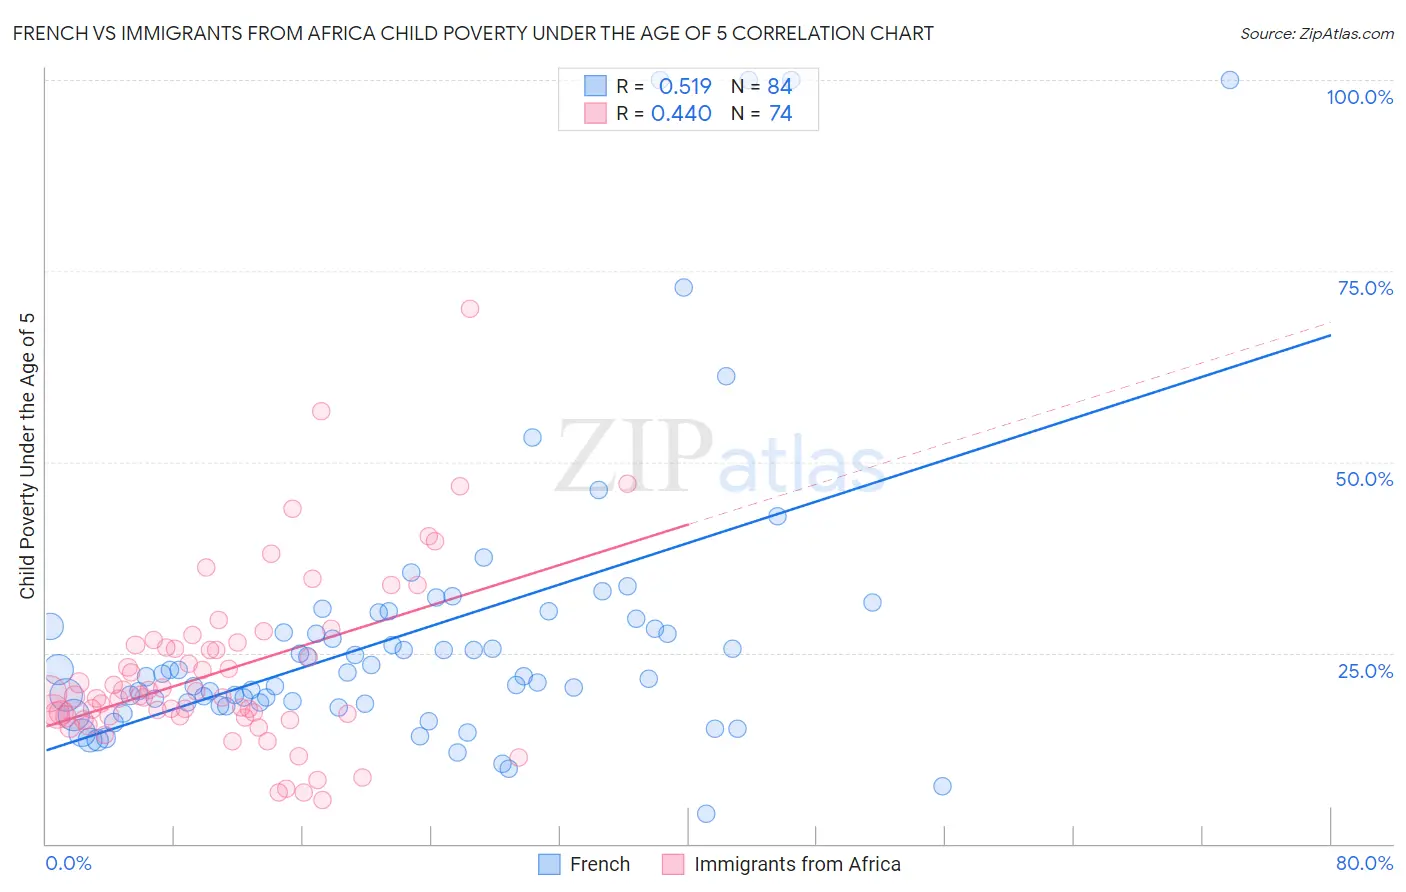 French vs Immigrants from Africa Child Poverty Under the Age of 5